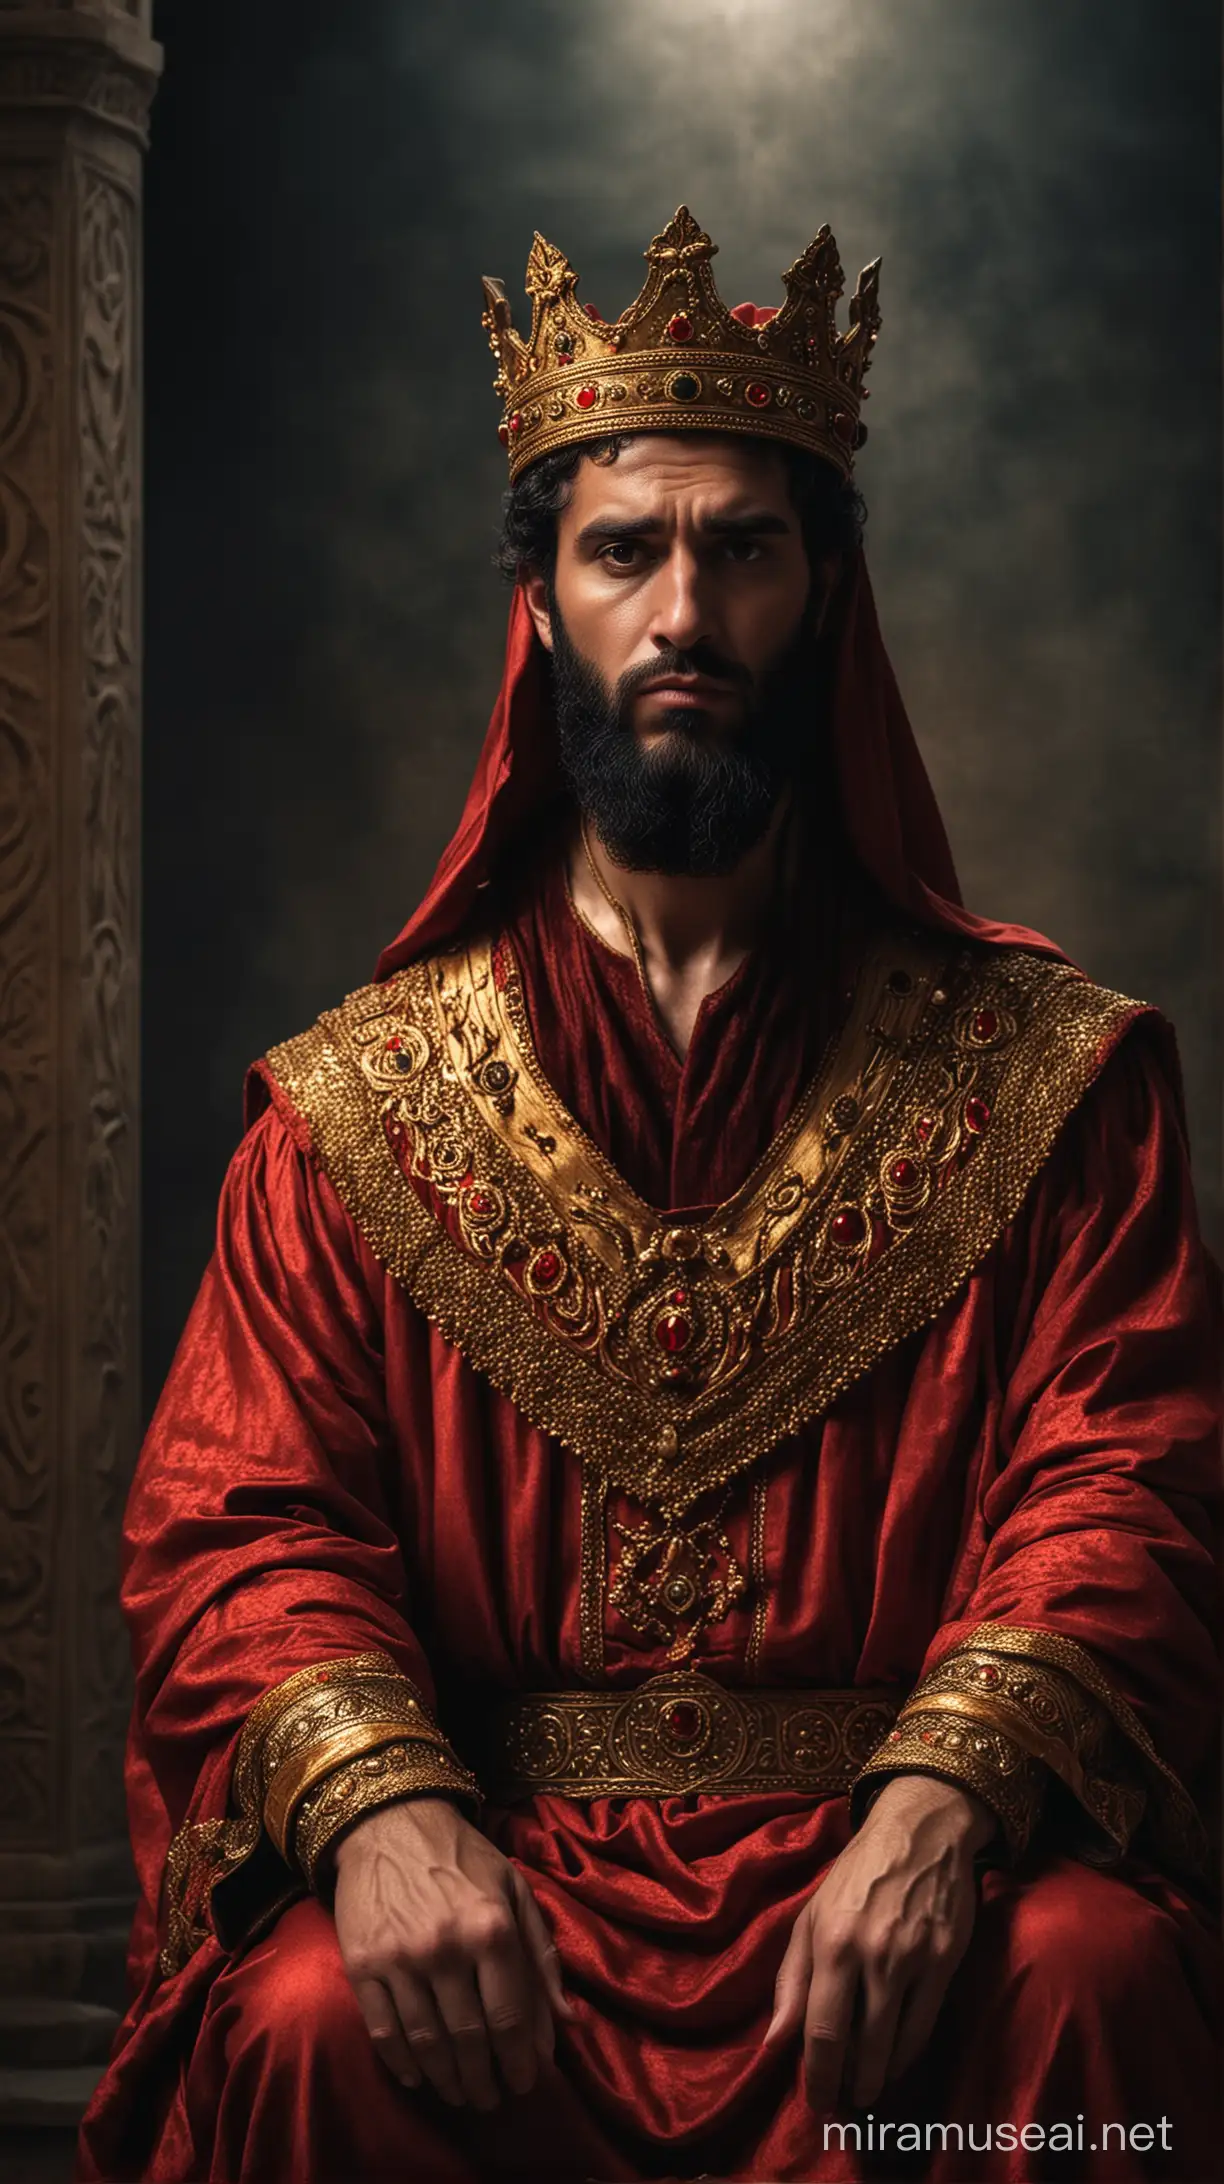 Herod the Great sitting in a moody background with his red and gold king attire